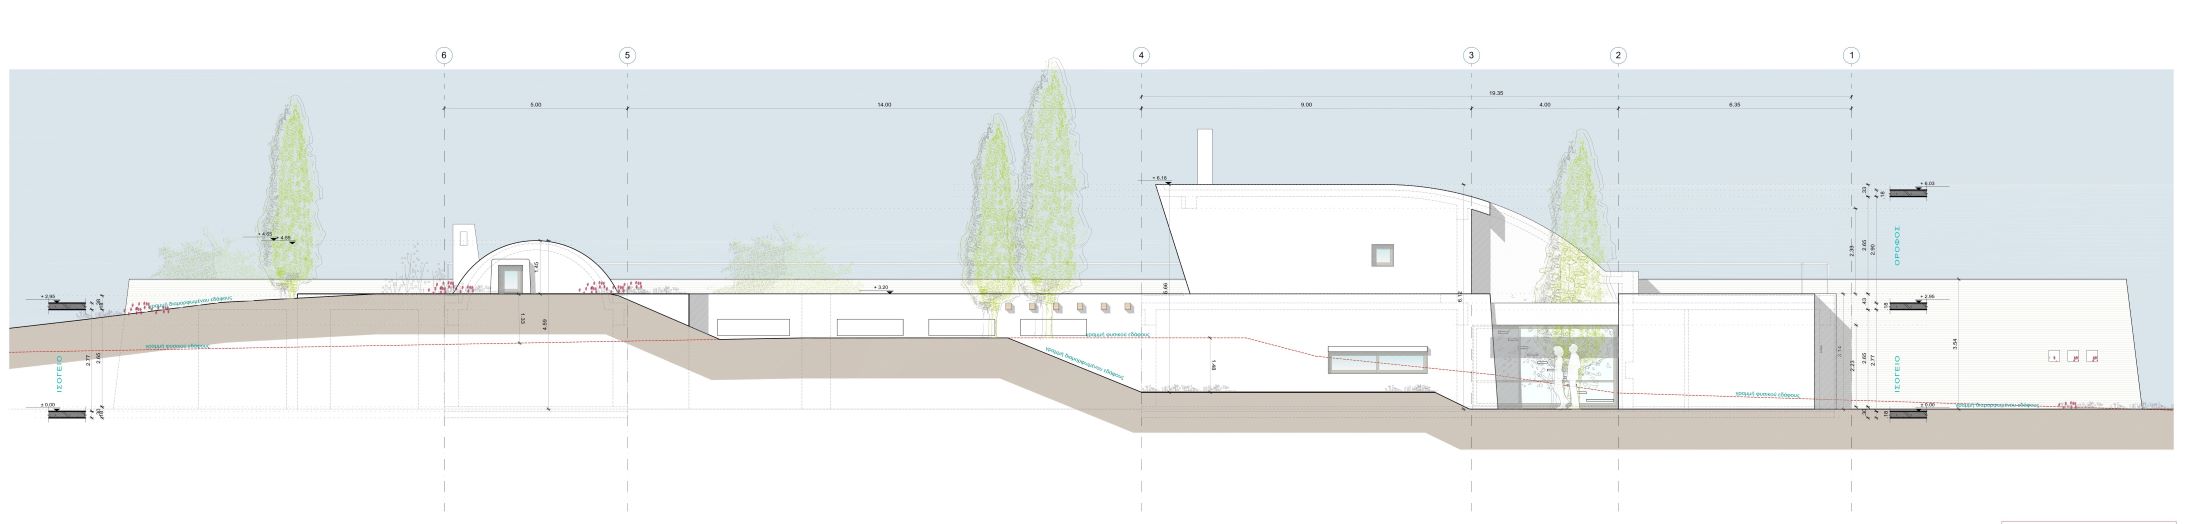 A11_north elevation Layout1 (1)